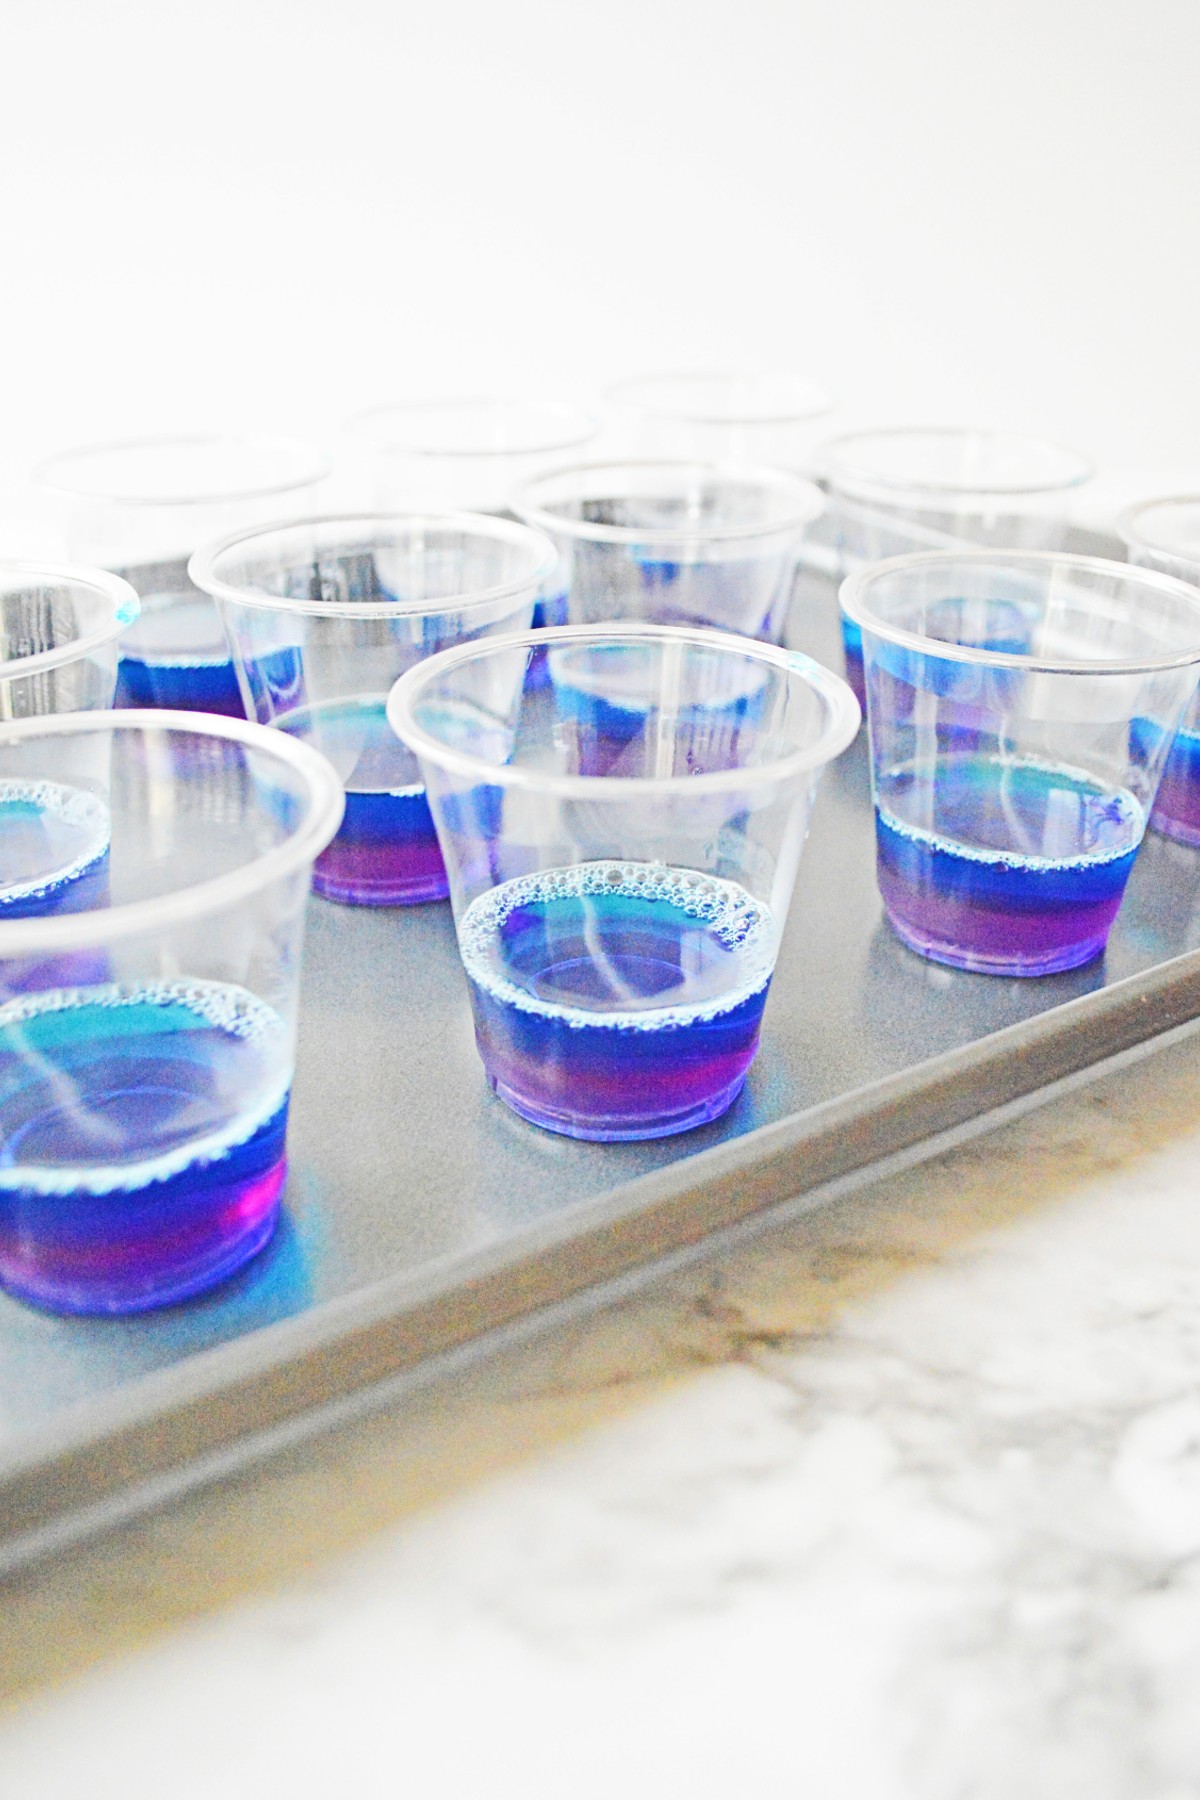 Close up of tray filled with small transparent cups with a blue layer of jello in the bottom